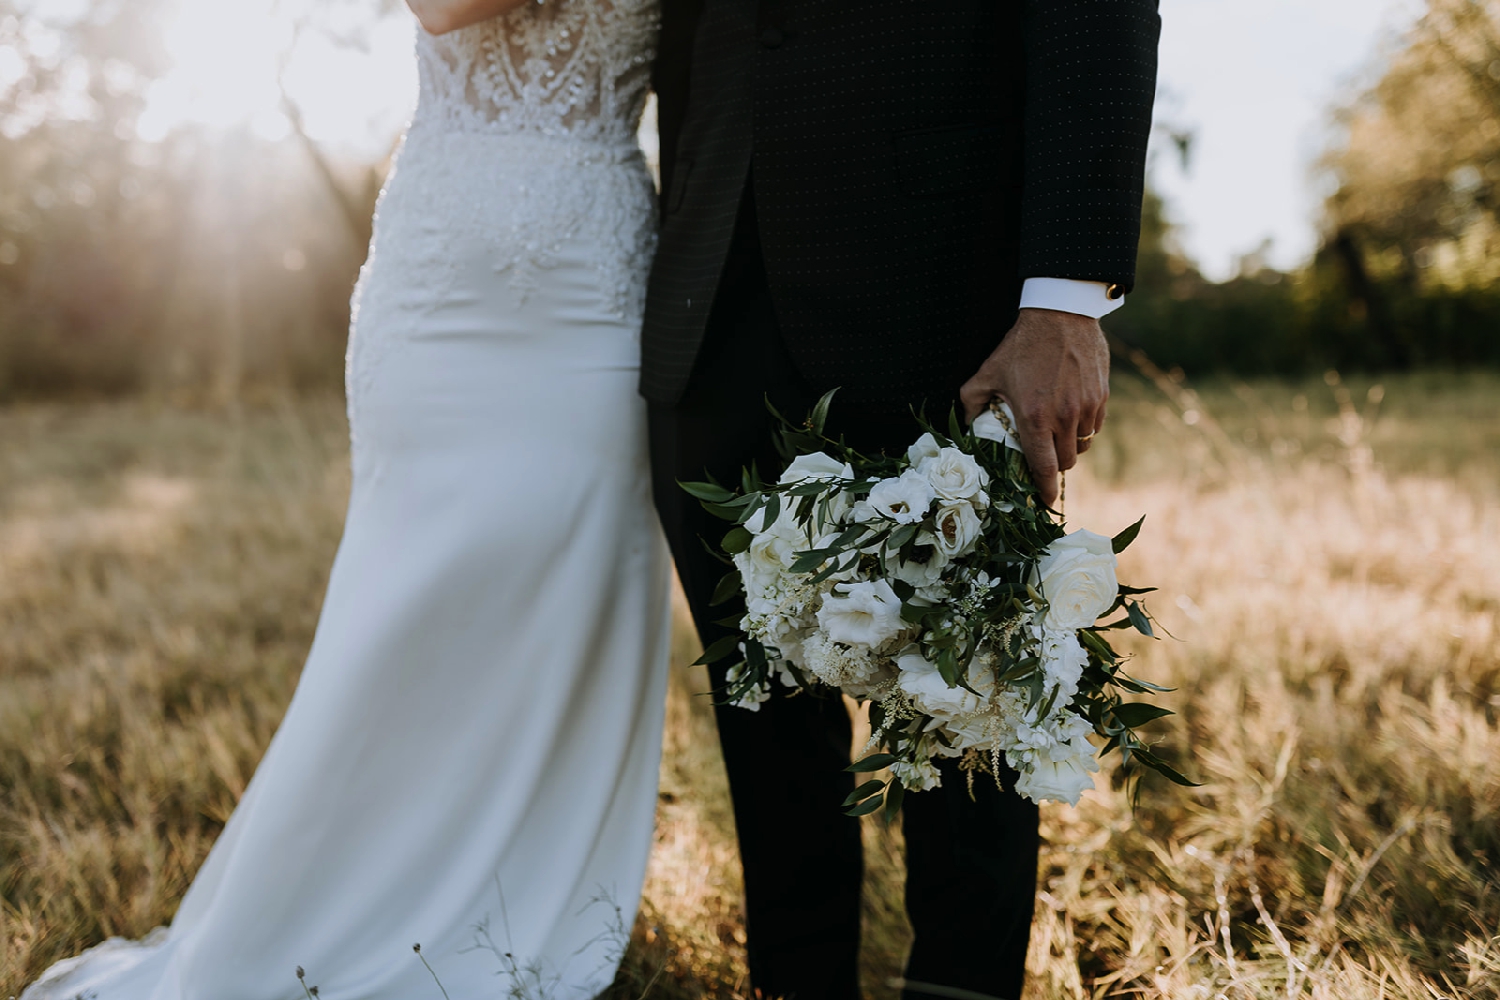 Bride and Groom Portraits on Wedding Day at Romantic Church Hall Wedding in San Antonio, Texas | Central Texas Floral Designer | Reiley and Rose